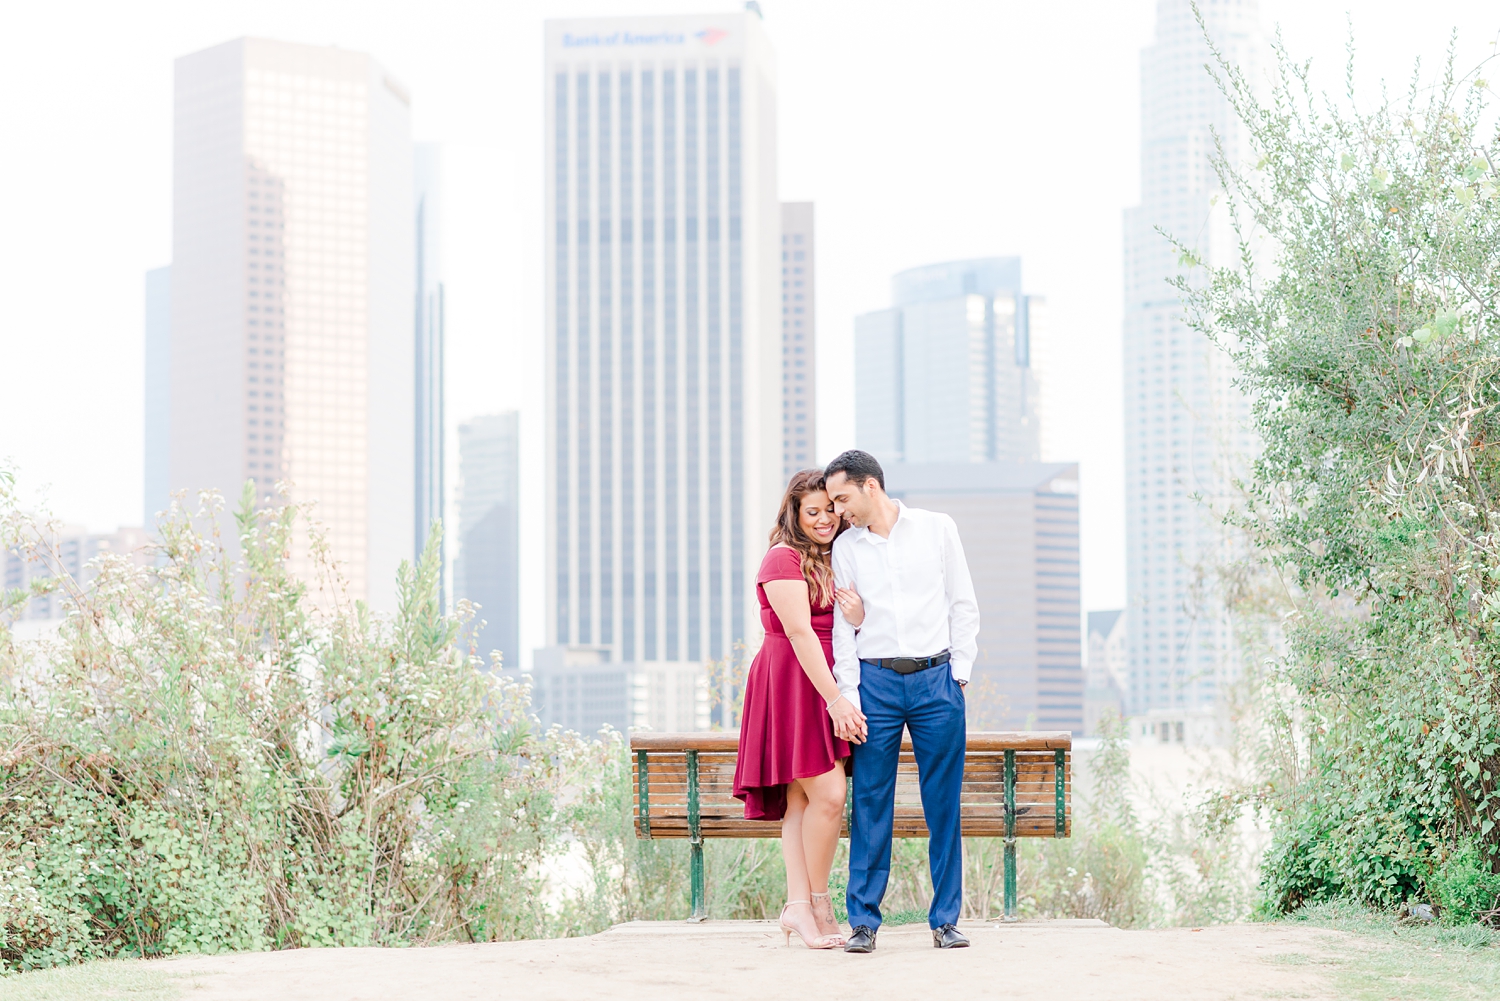 location ideas for engagement photos in southern california_0148.jpg